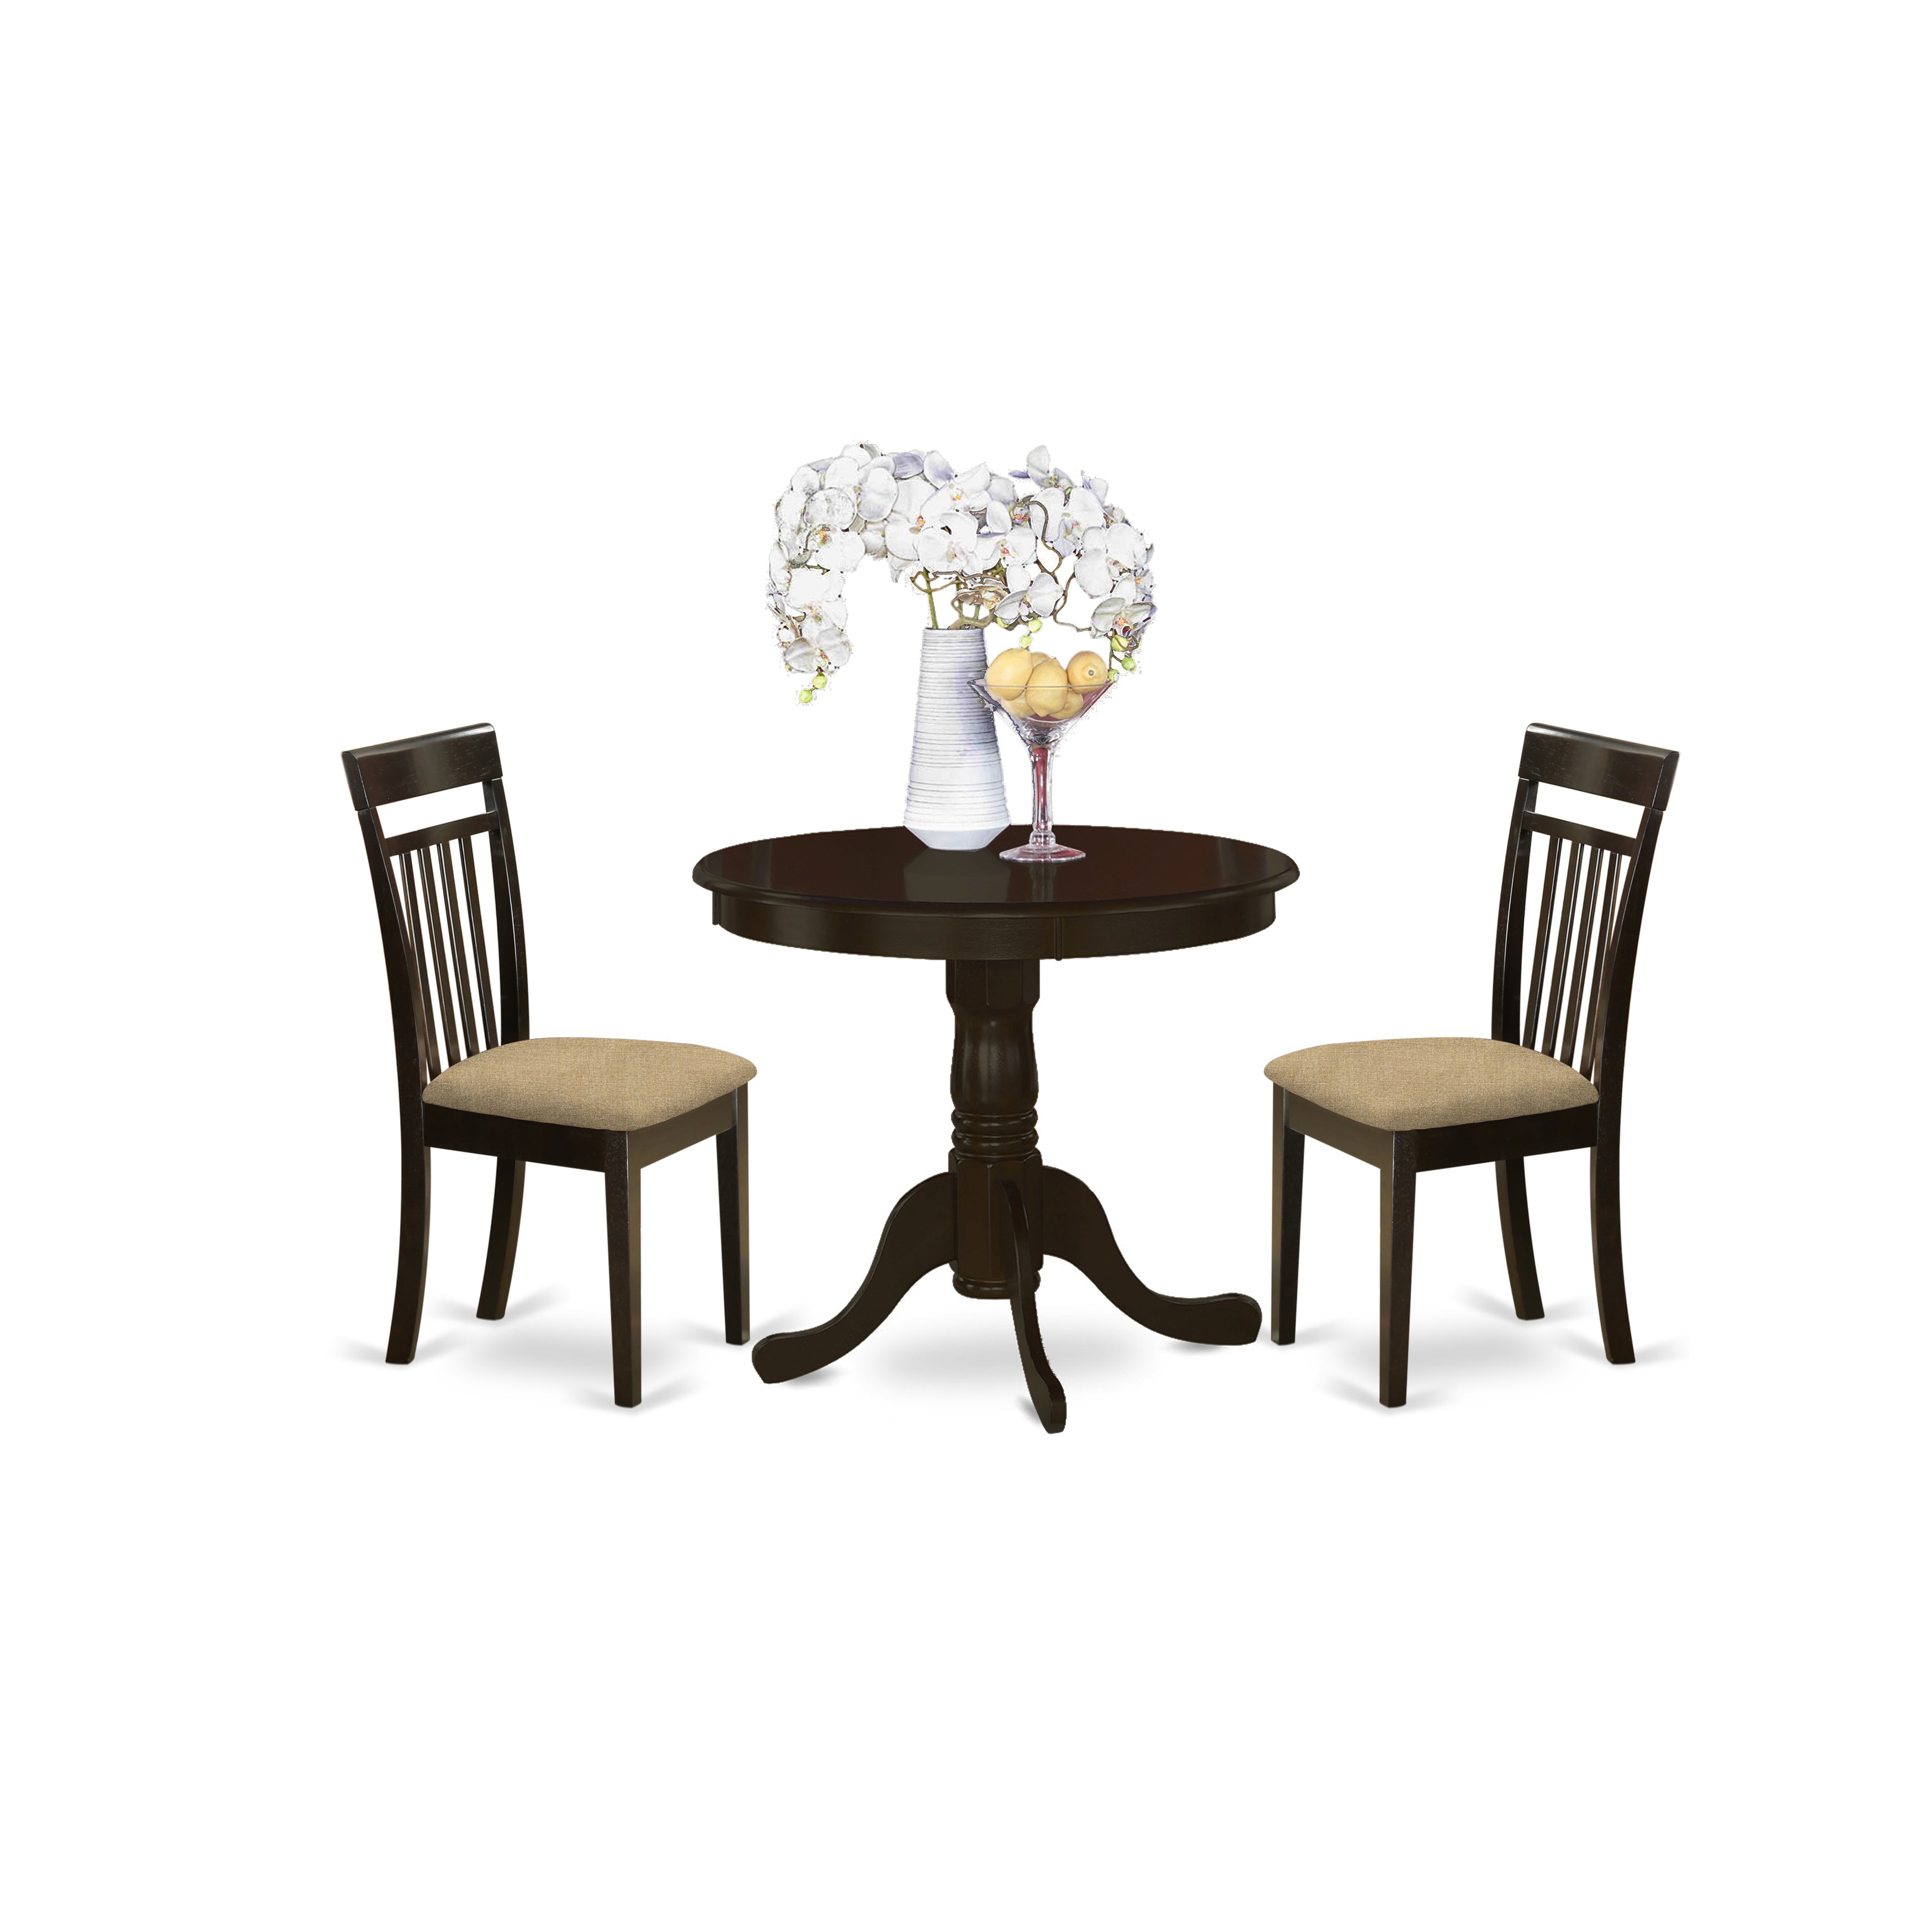 ANCA3-CAP-C 3 Pc small Kitchen Table set-breakfast nook plus 2 dinette Chairs